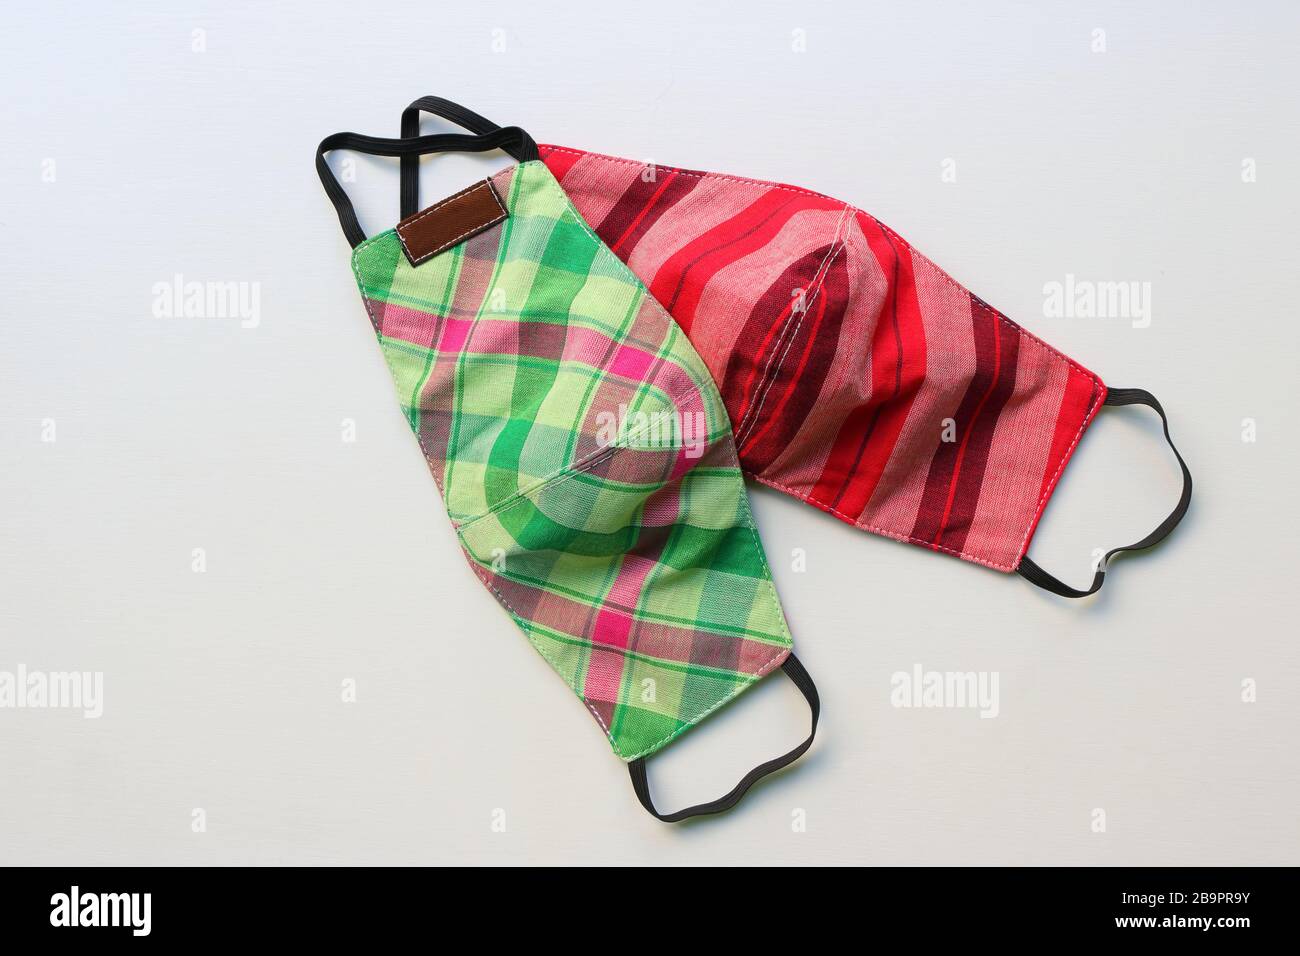 Handmade face masks made from plaid cloth, washable and reusable, can be used during shortage of surgical mask due to coronavirus outbreak Stock Photo